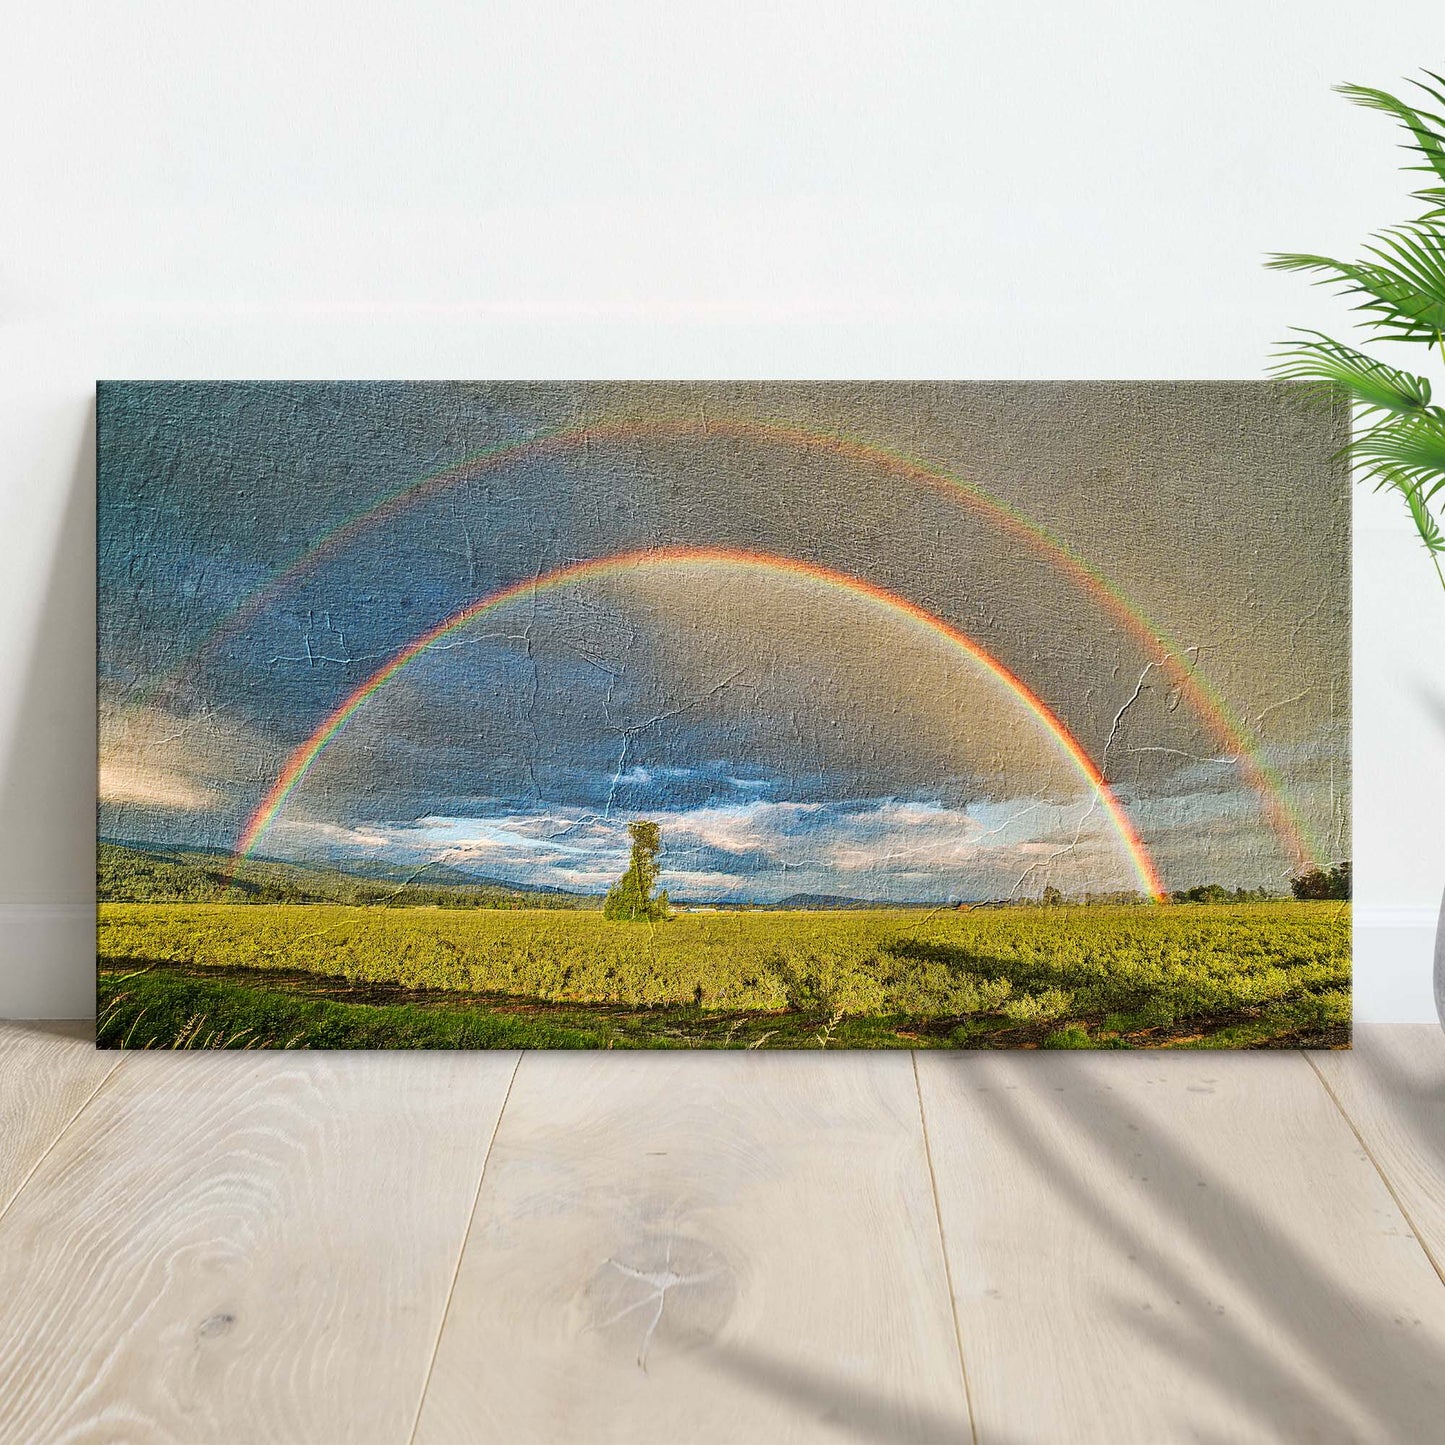 Double Rainbow Over The Field Canvas Wall Art - Image by Tailored Canvases